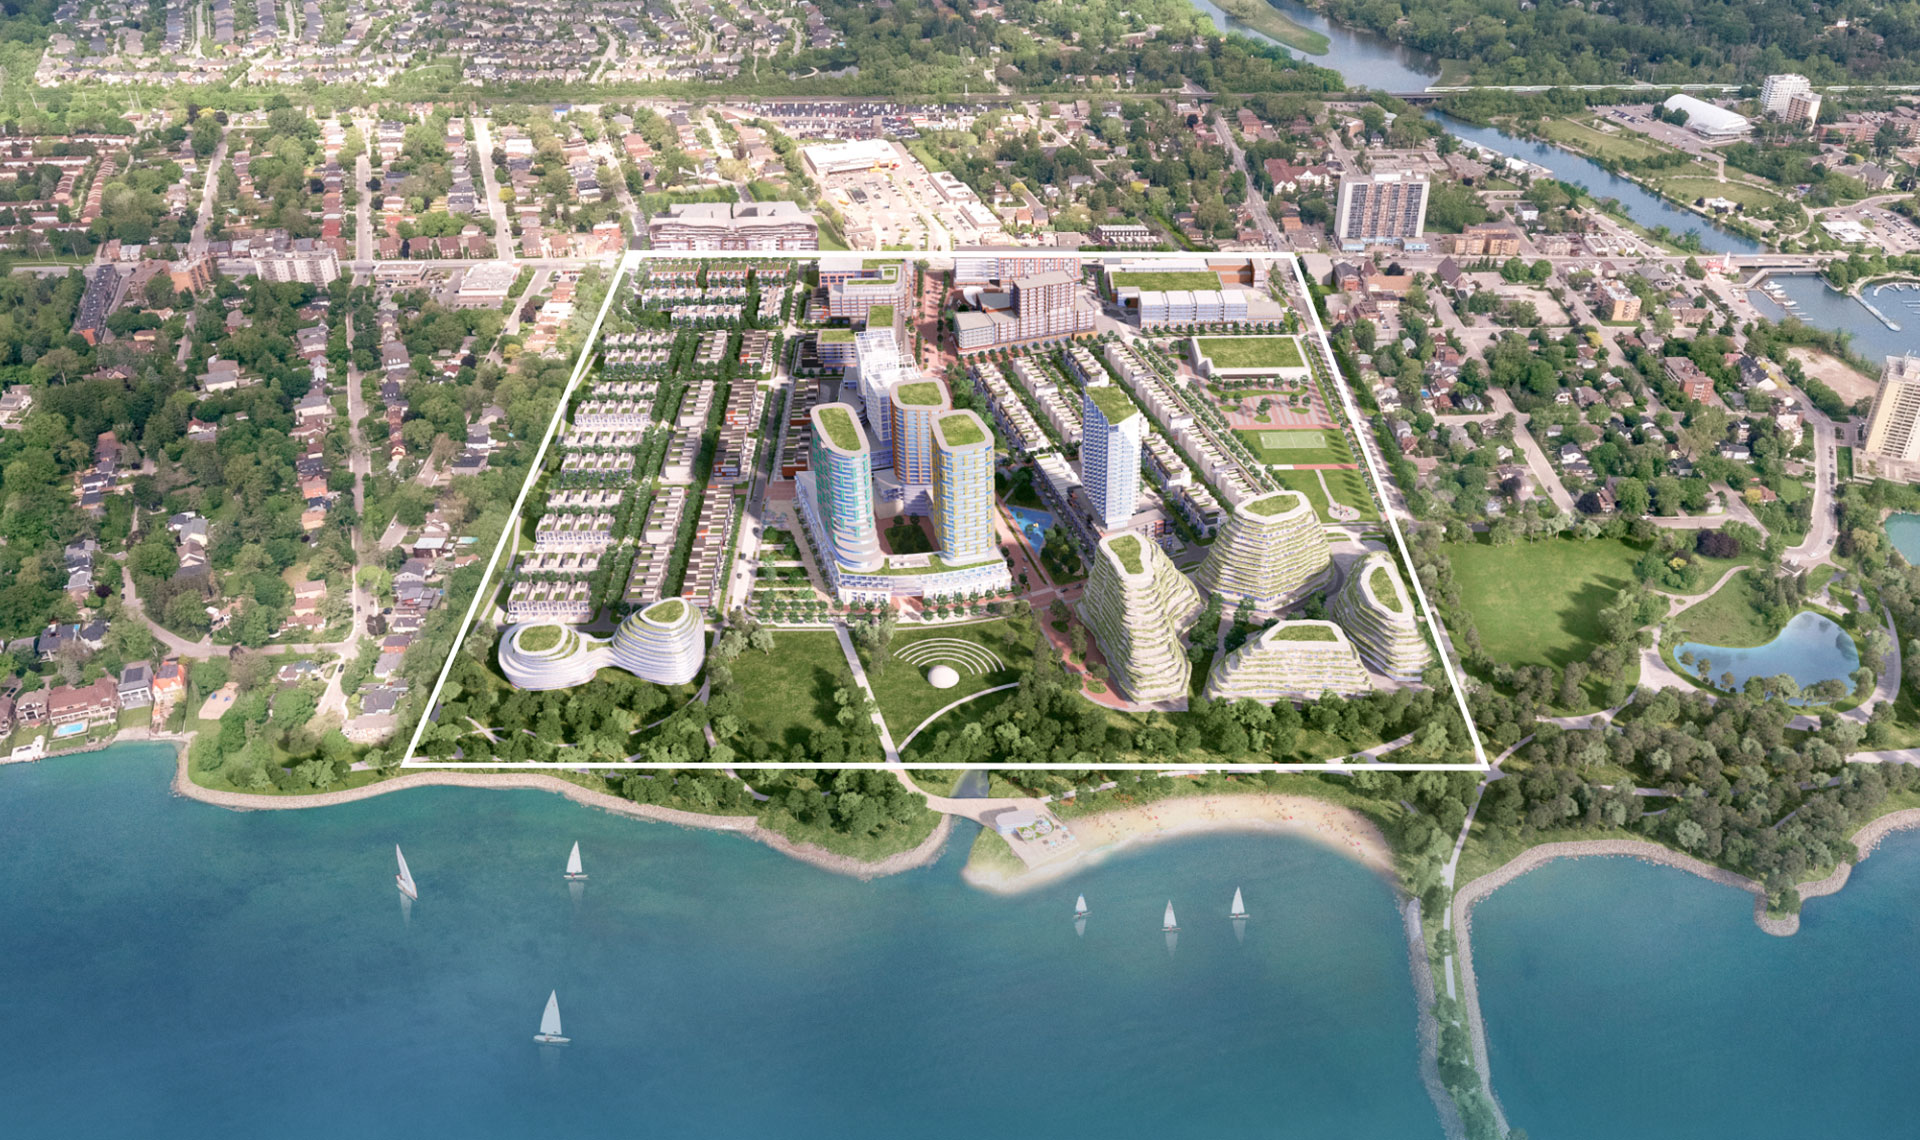 Concept image of the Mississauga Brightwater Waterfront Master Plan